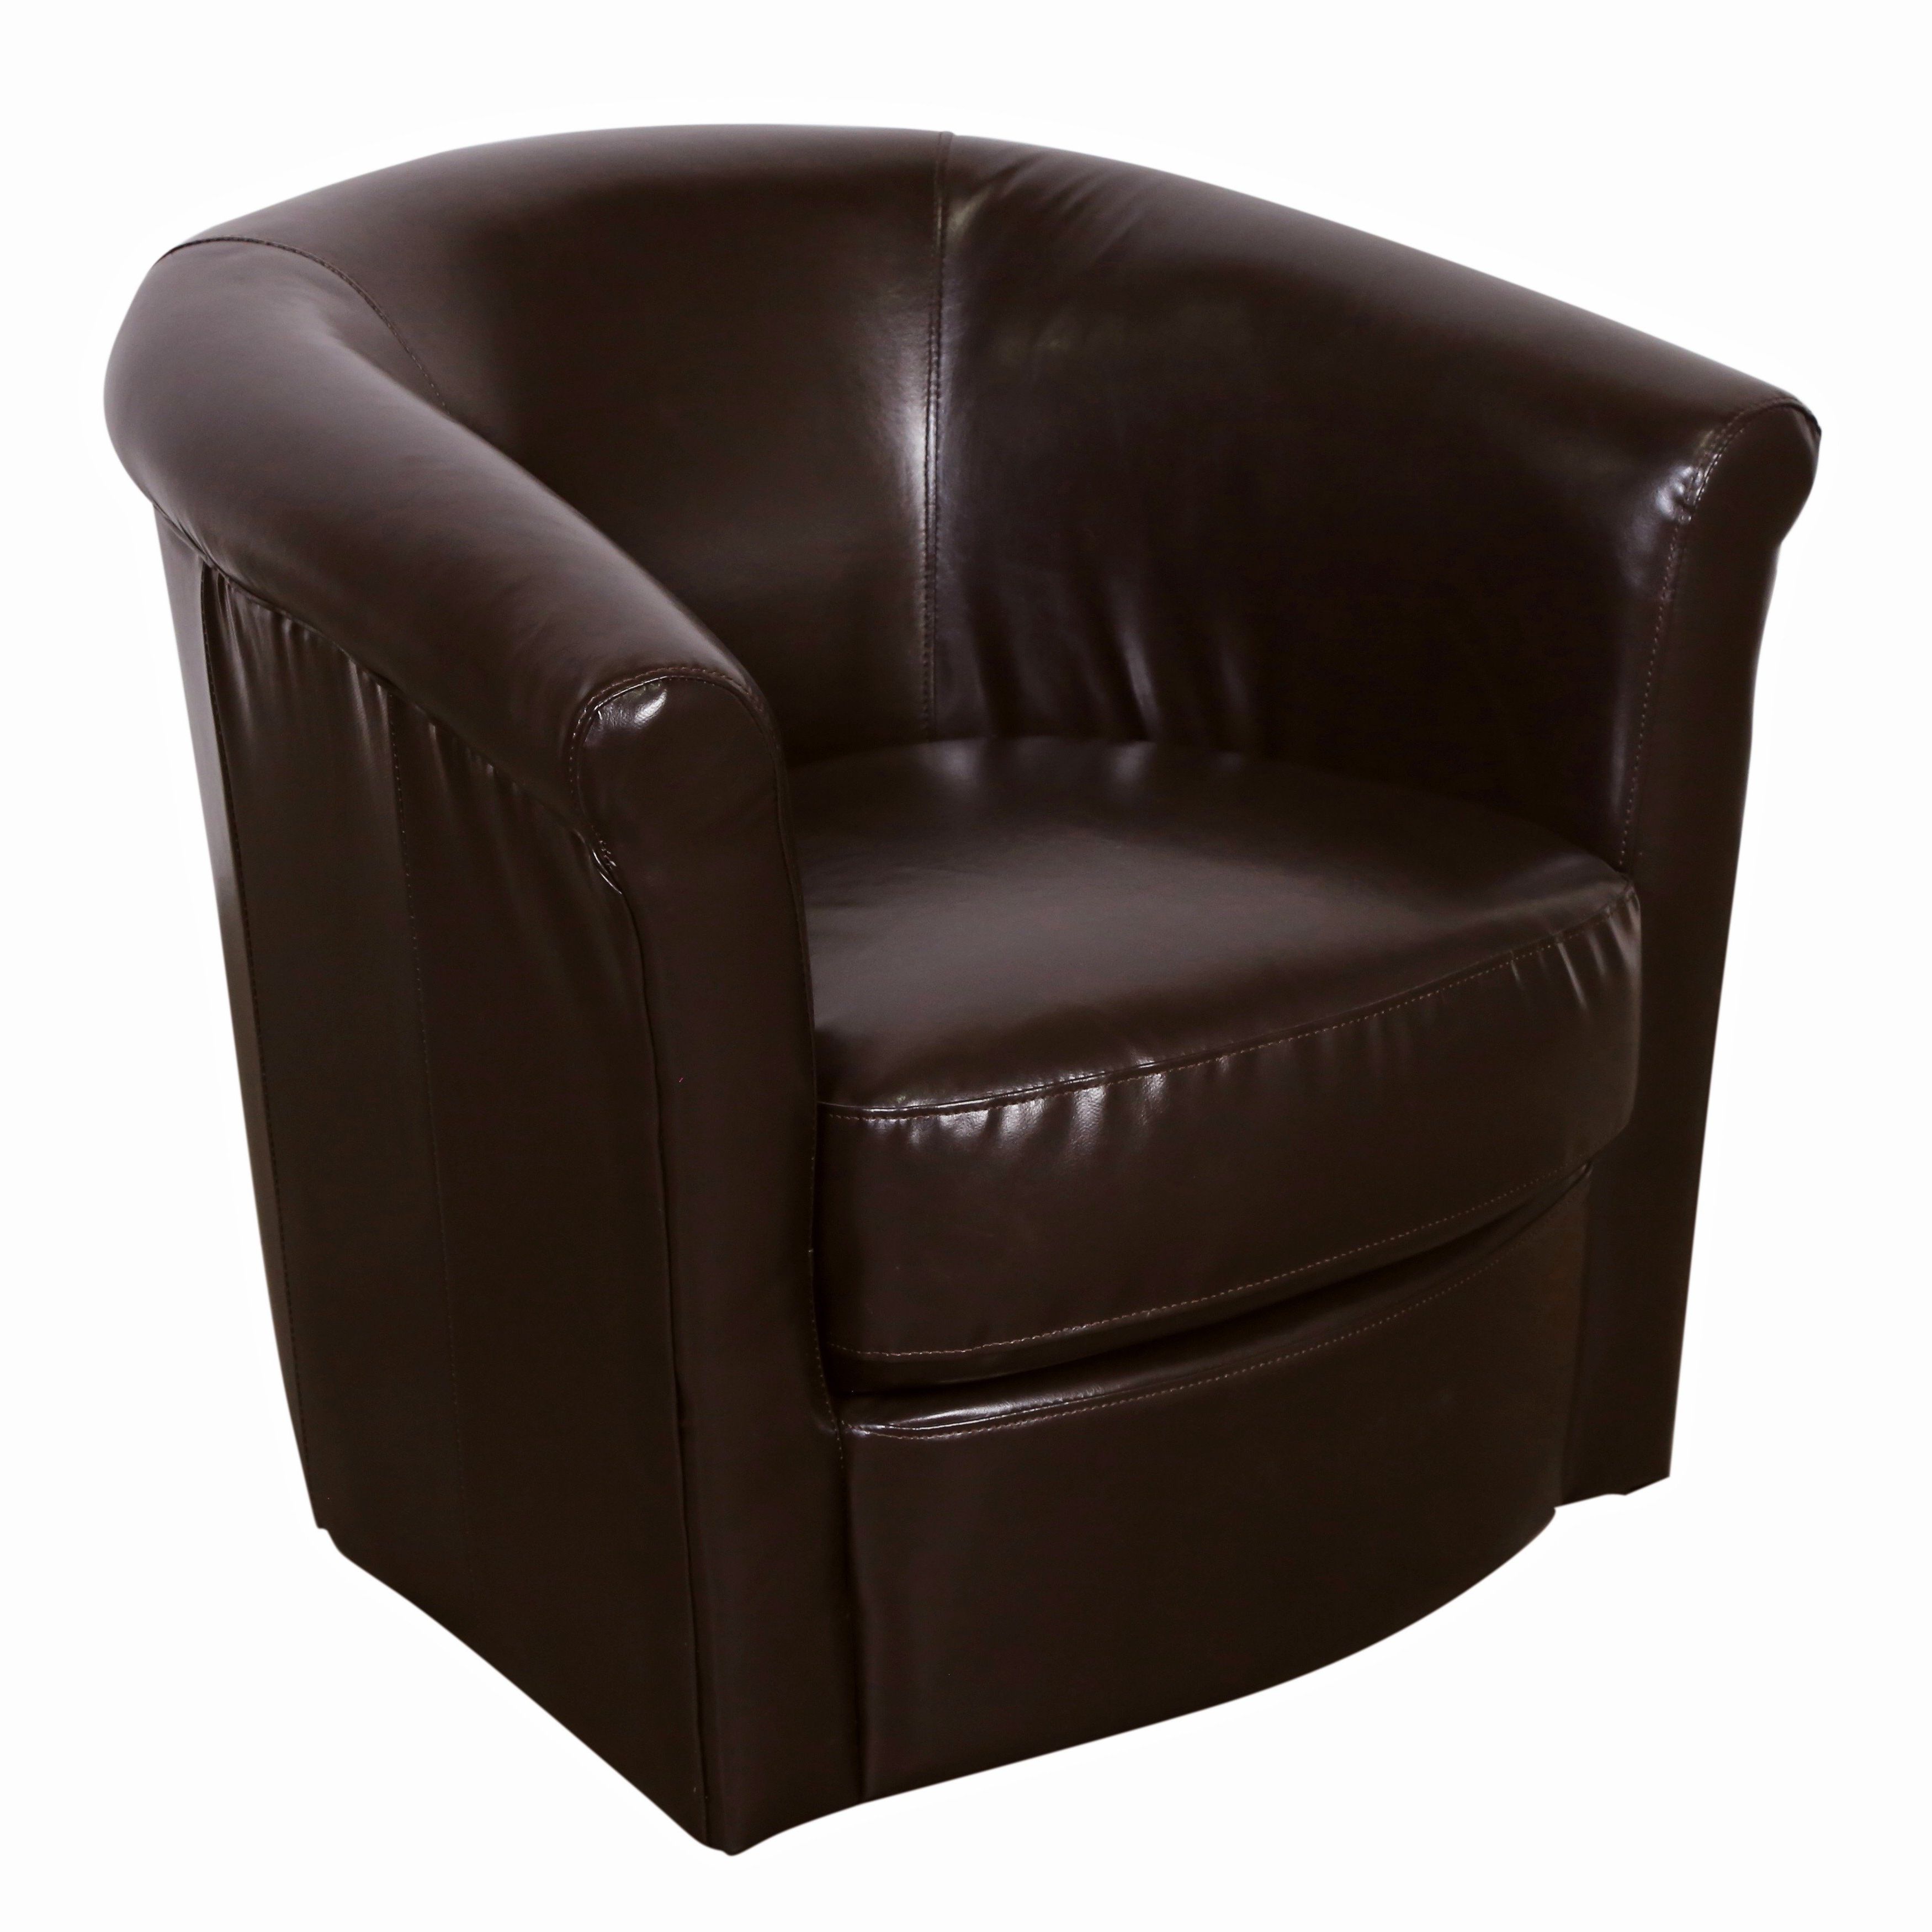 Espresso Leather Swivel Chairs With Most Popular Shop Porter Marvel Espresso Brown Swivel Barrel Accent Chair – Free (View 15 of 20)